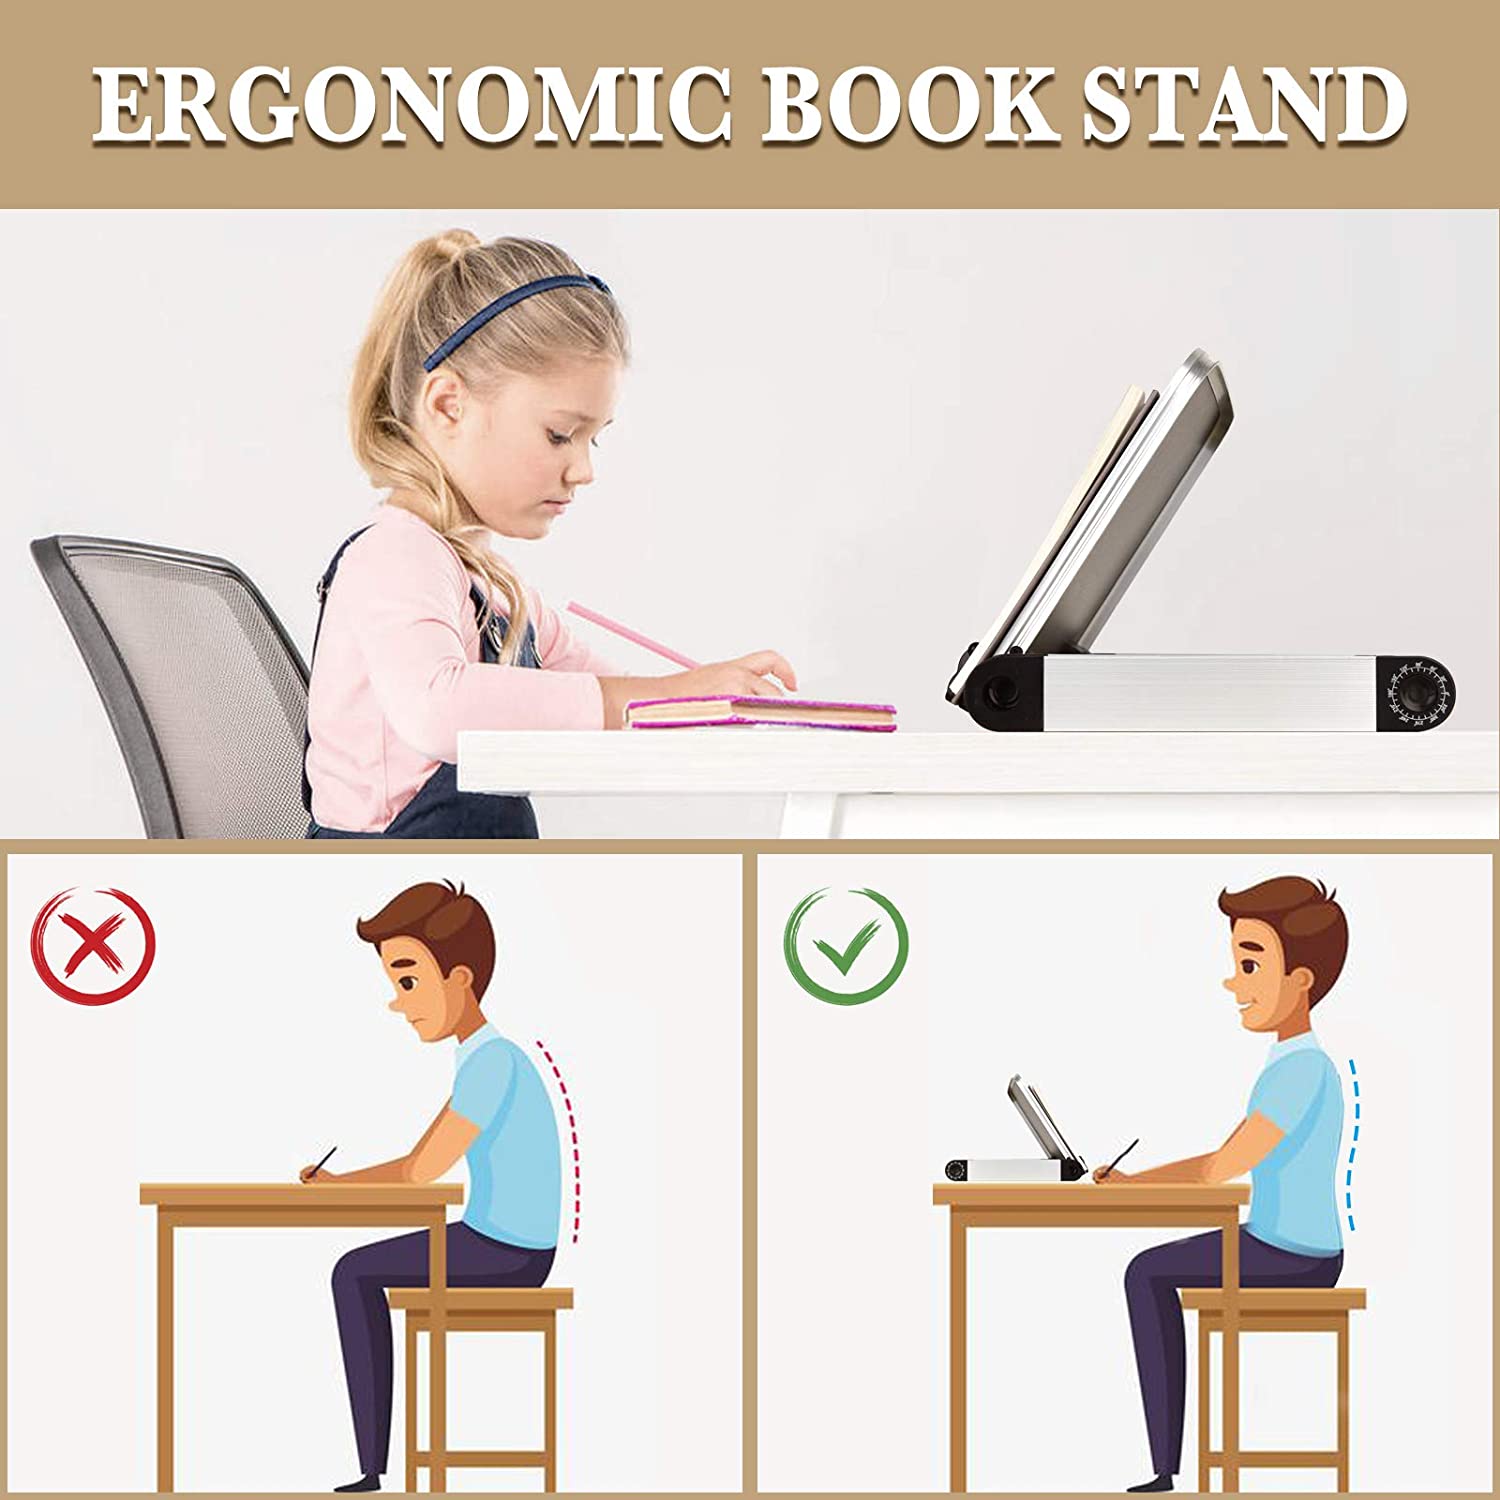 Book Stand, Book Holder Adjustable Height & Angle Ergonomic with Page Paper Clips for Reading Big Heavy Textbooks Music Books Tablet Cook Recipe Hands Free ,White,Amazon Banned